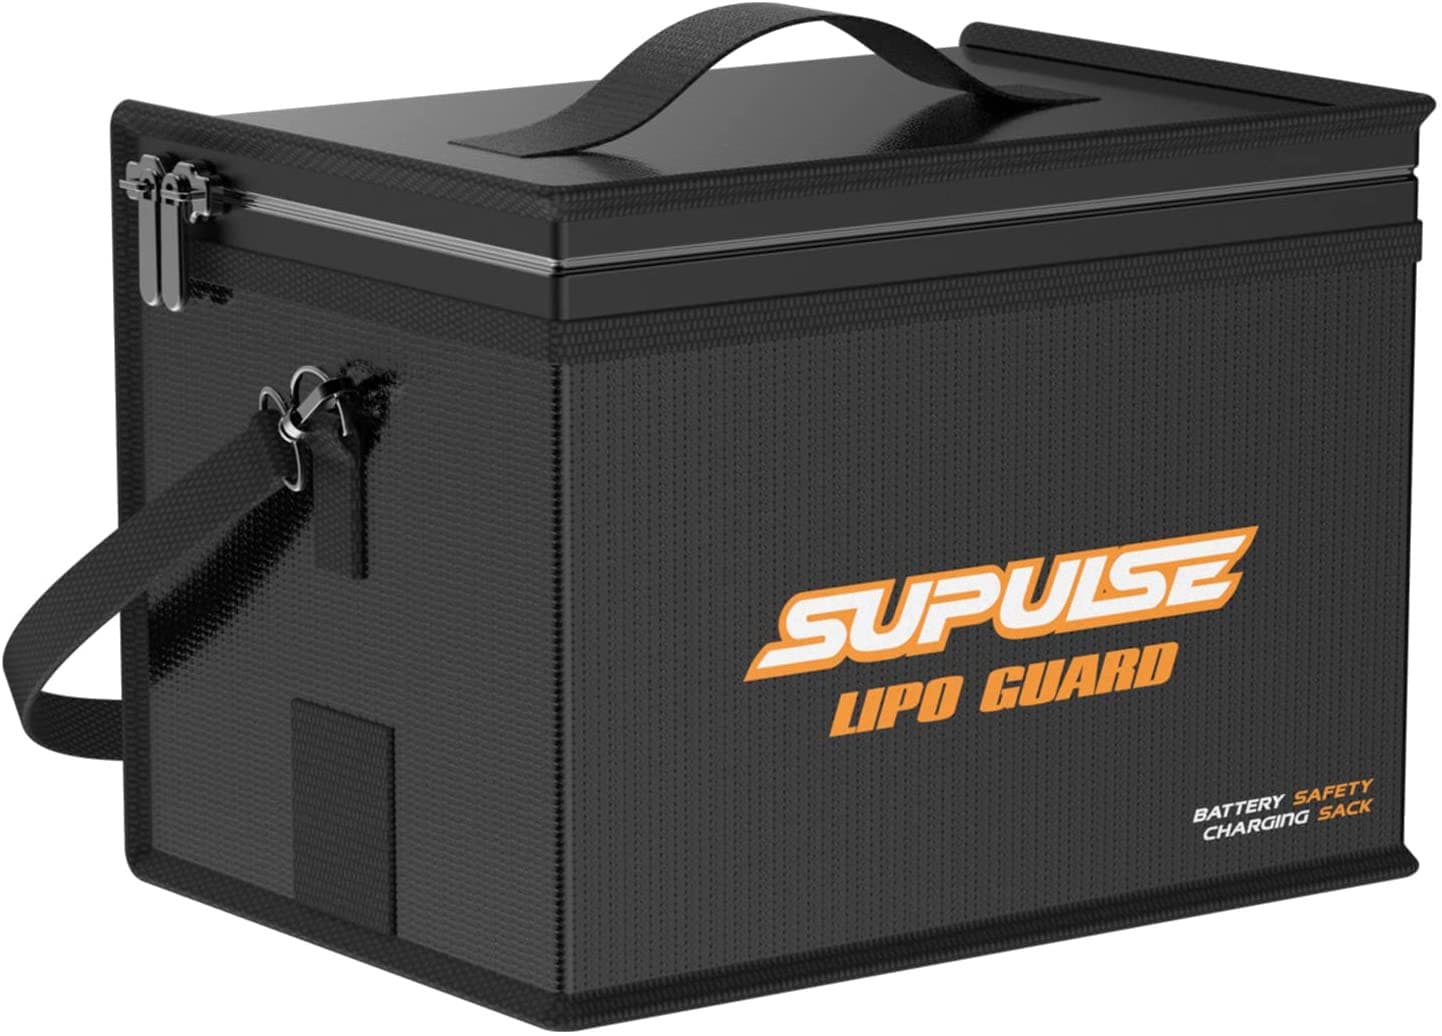 SUPULSE Lipo Safe Bag x1 Fireproof Explosionproof for Lithium Battery Storage and Charging(7.9" x 5.9" x 5.9") - EXHOBBY